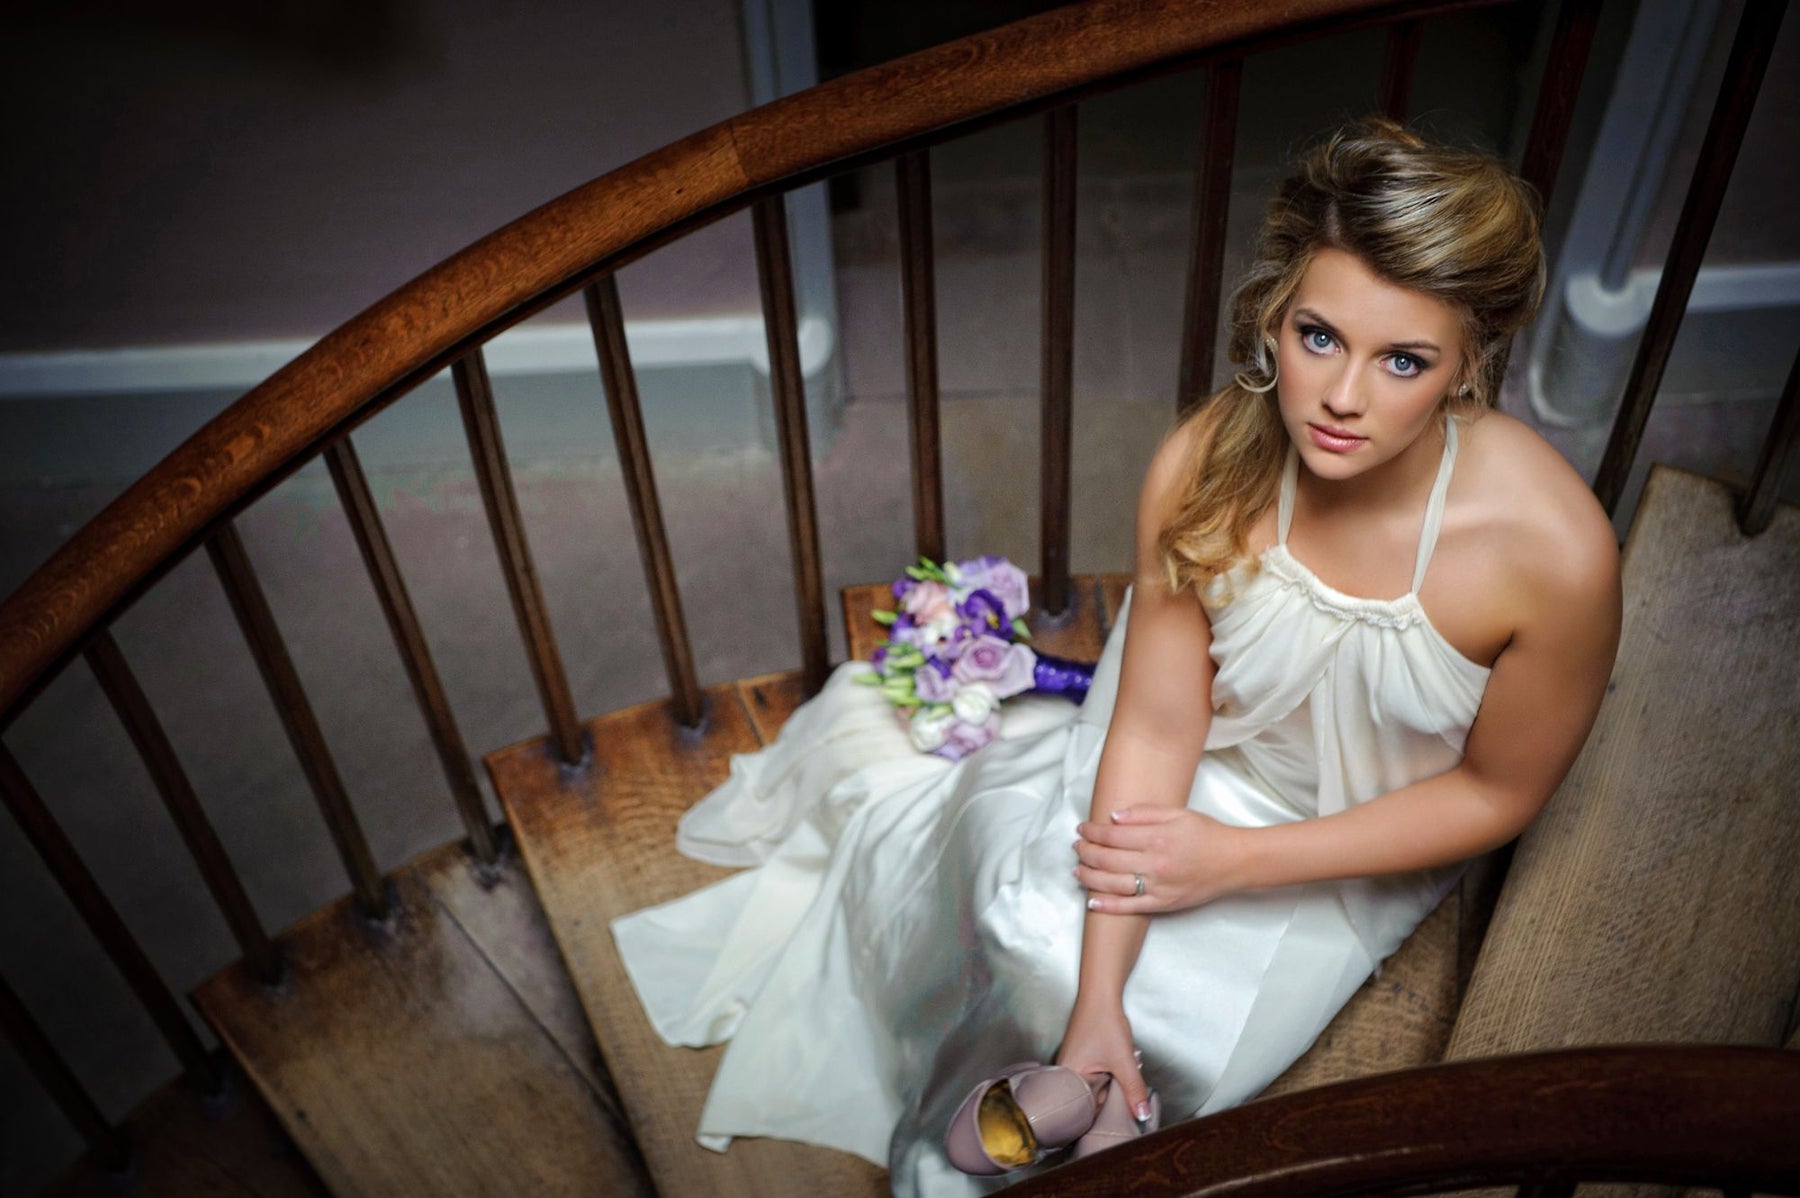 Changing tastes in wedding photography